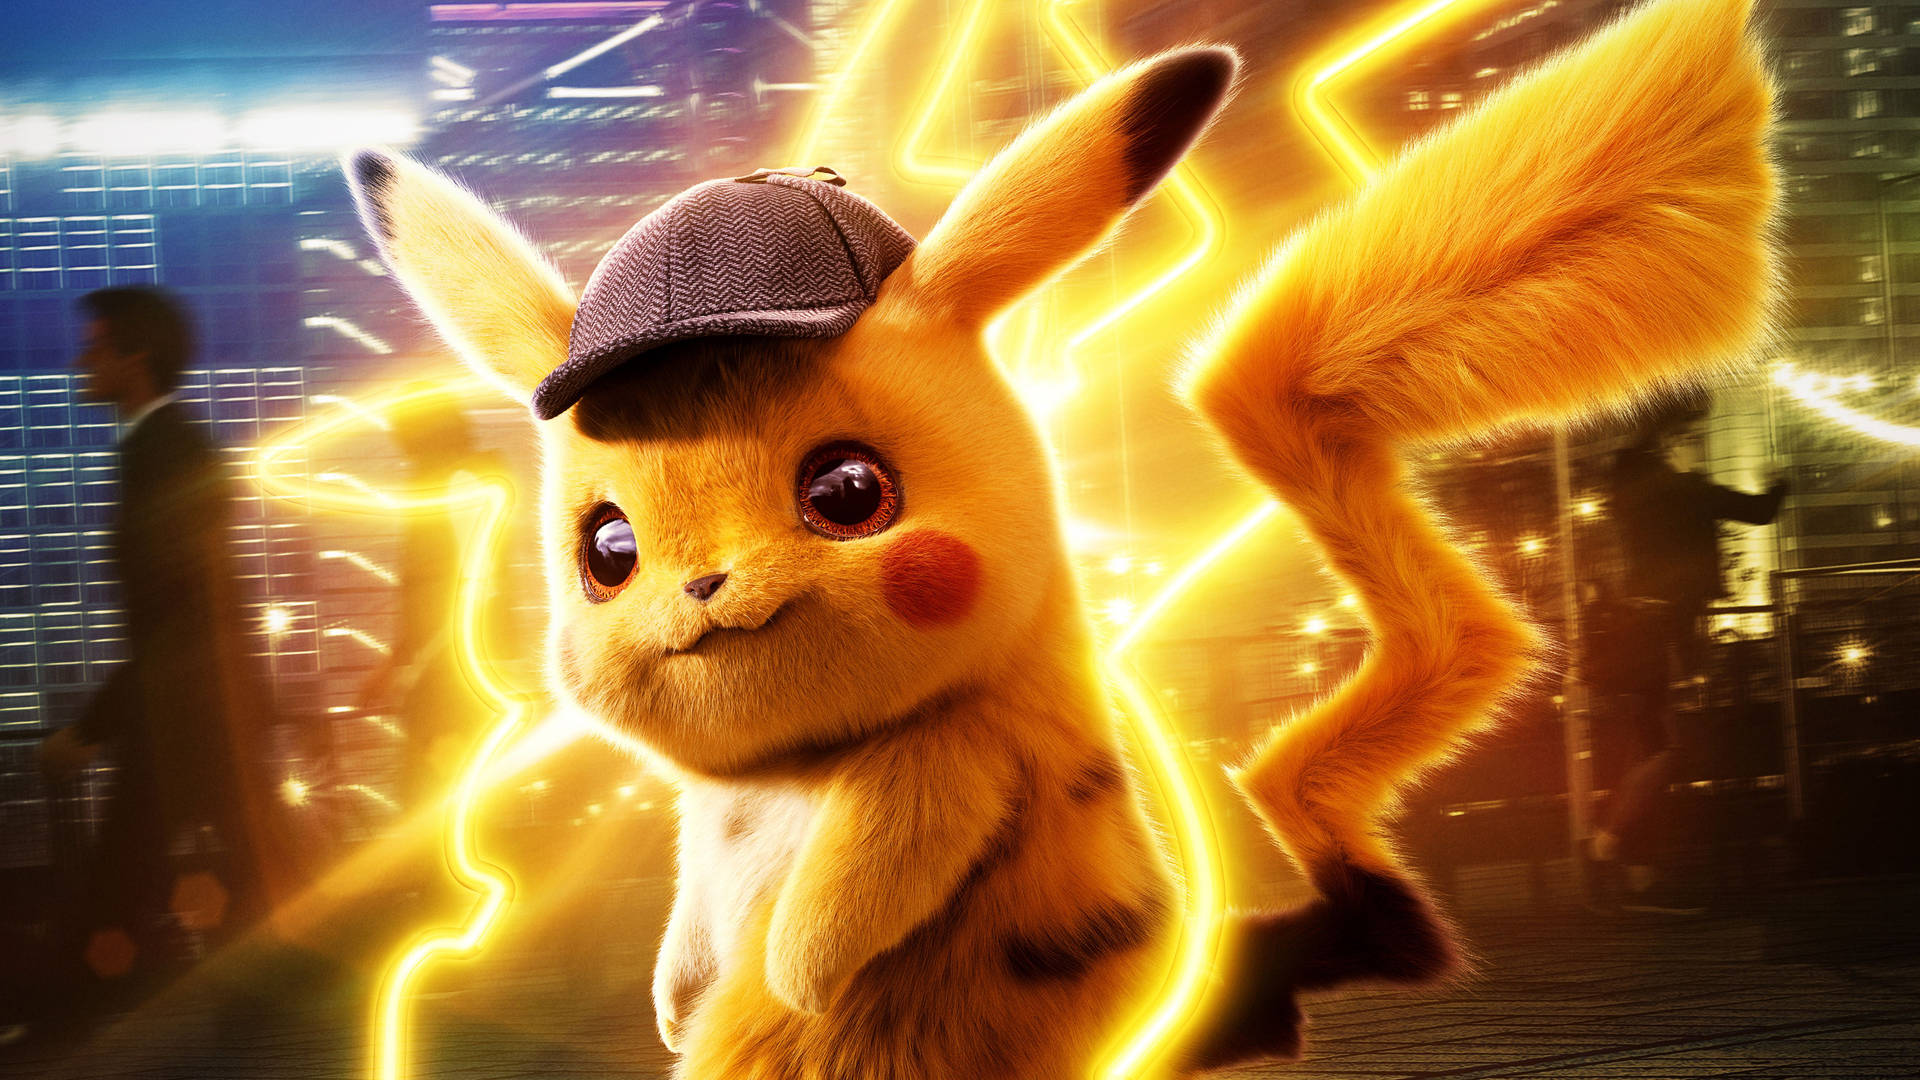 Upcoming Detective Pikachu 2 Exciting New Chapter Without Ryan Reynolds, Ash's Pikachu to Shine--